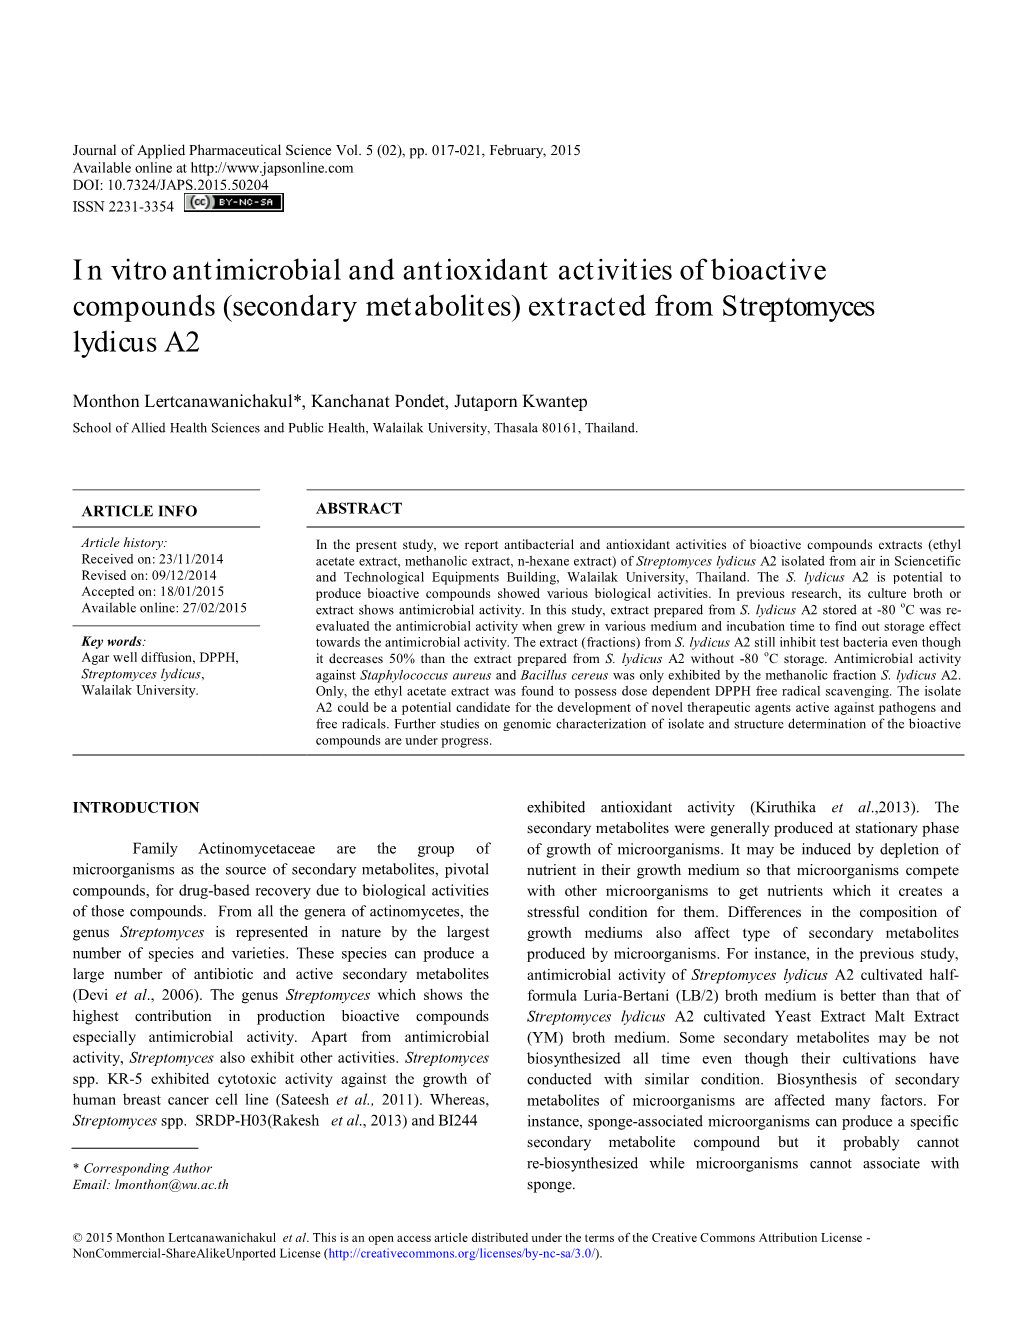 In Vitro Antimicrobial and Antioxidant Activities of Bioactive Compounds (Secondary Metabolites) Extracted from Streptomyces Lydicus A2